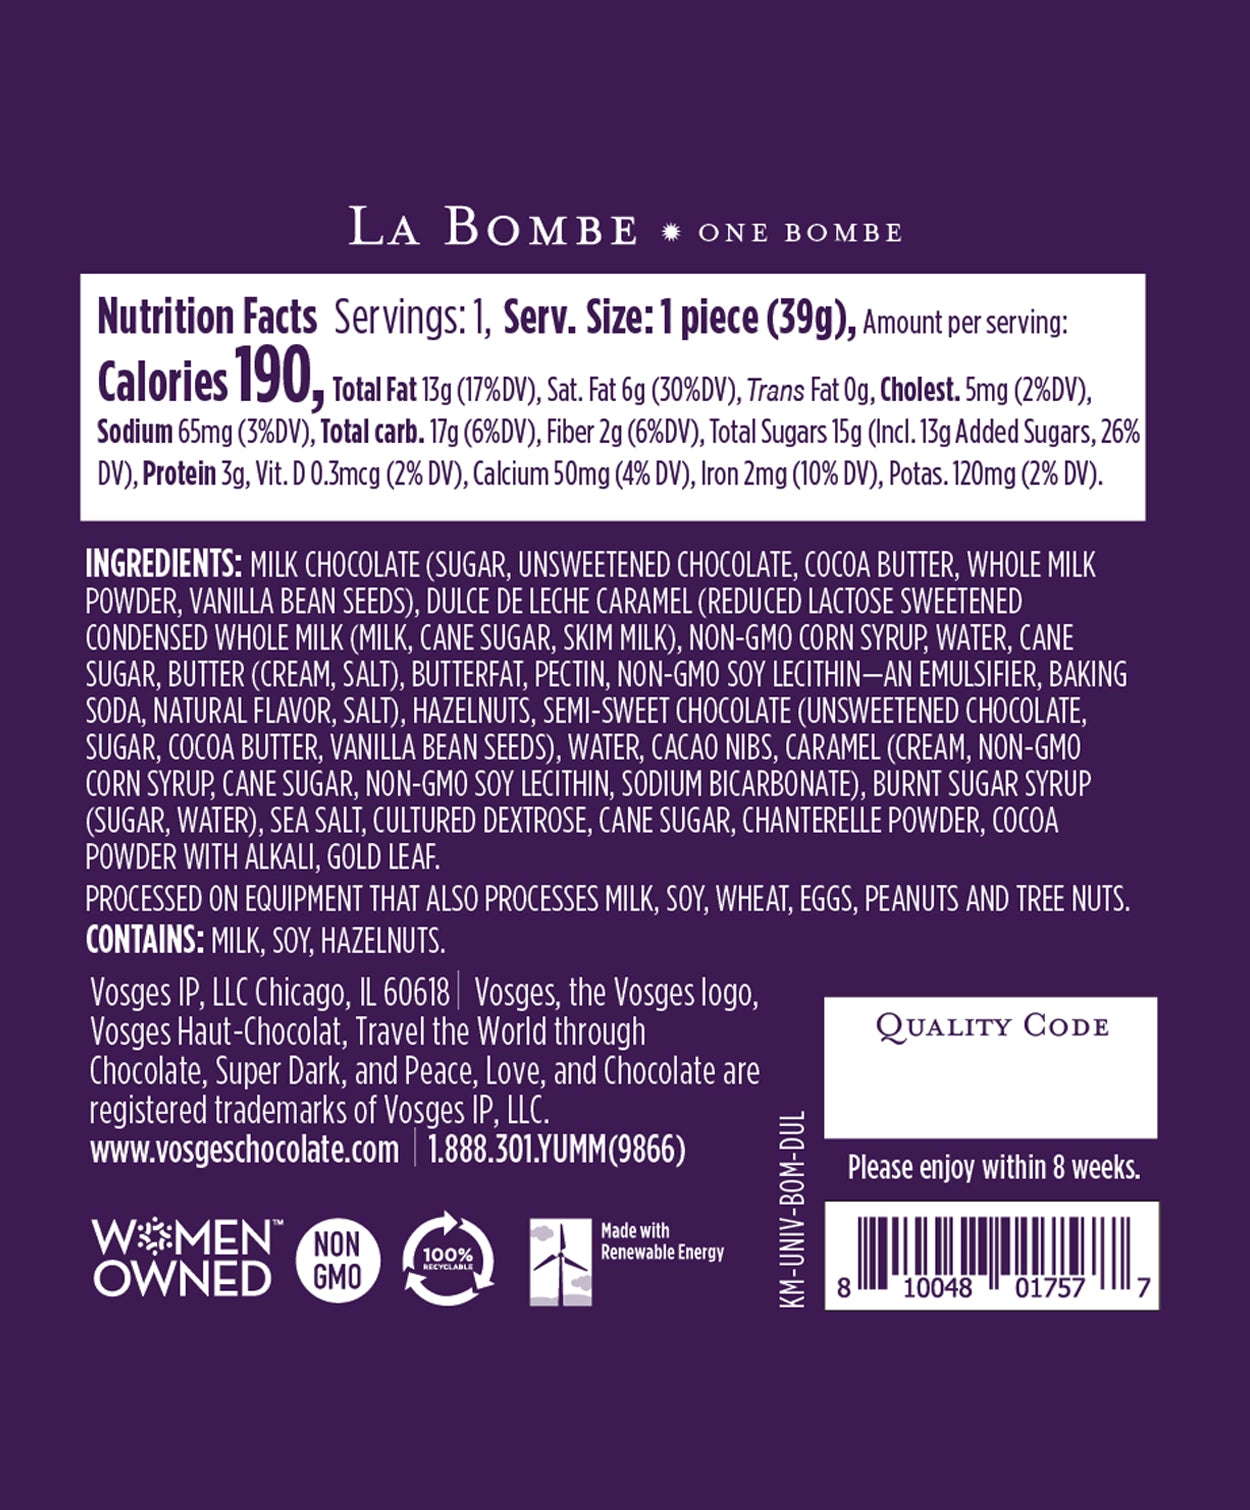 Nutrition Facts and Ingredients of Vosges Haut-Chocolat La Bombe printed in white san-serif font on a dark purple background.